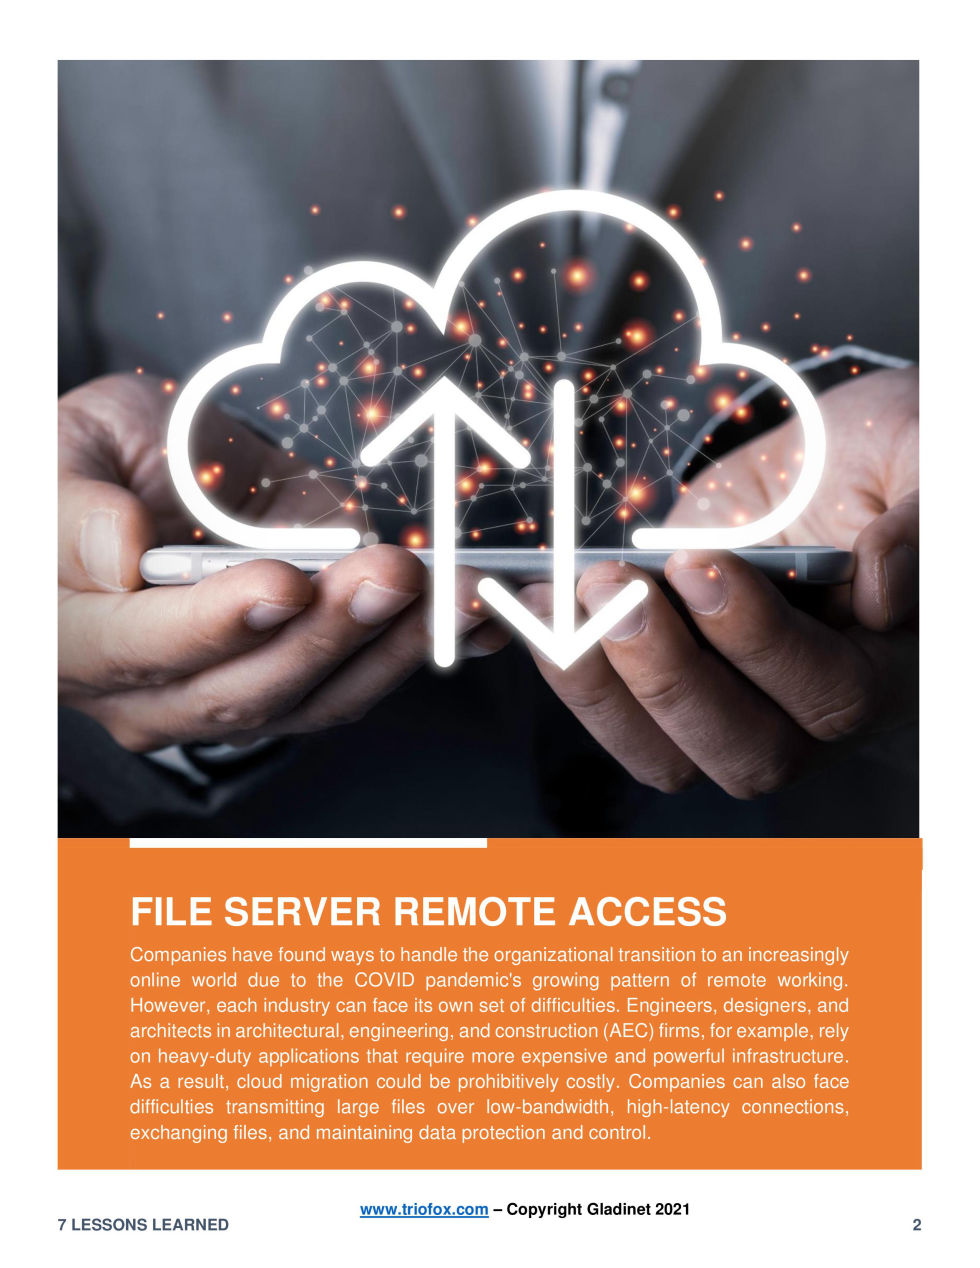 lessons about file server remote access